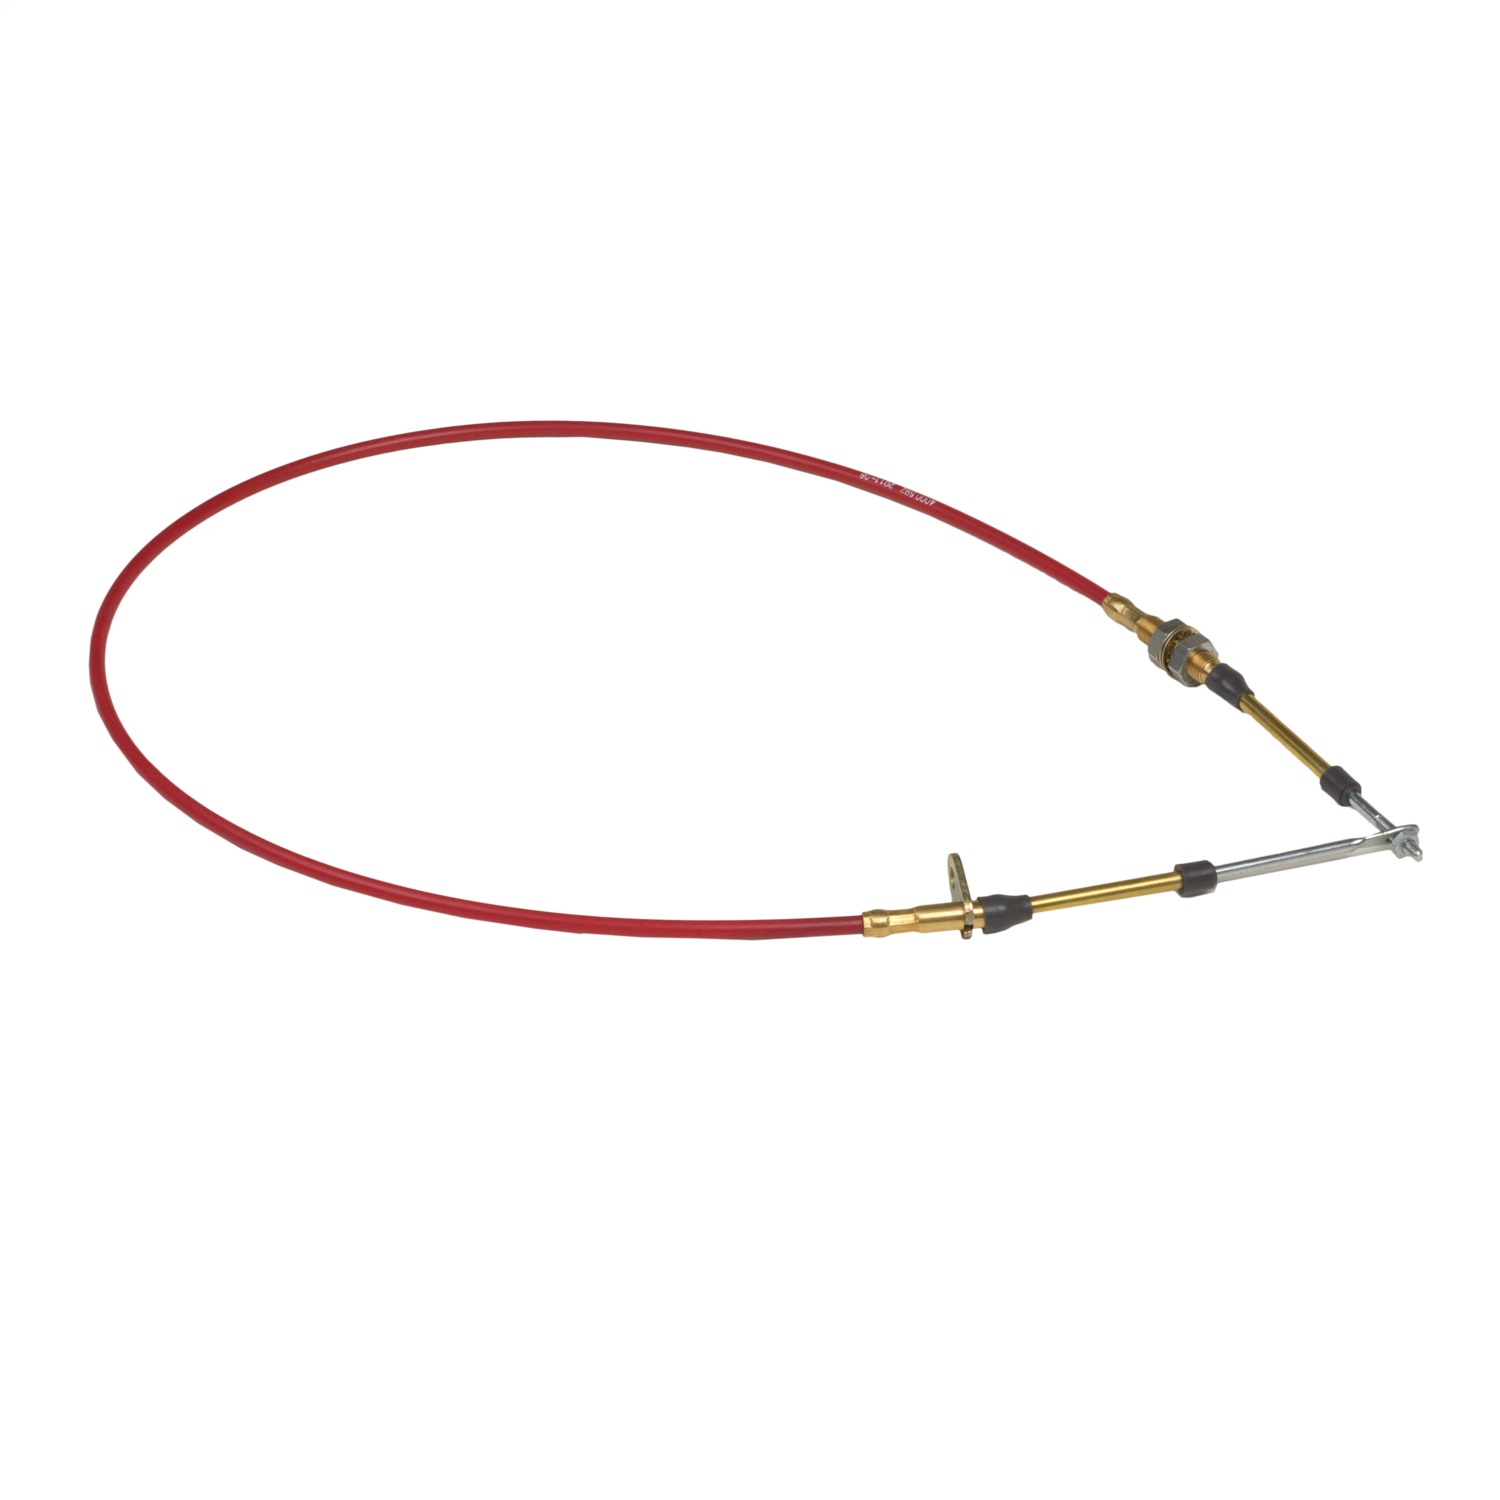 B&M 80605 Performance Shifter Cable